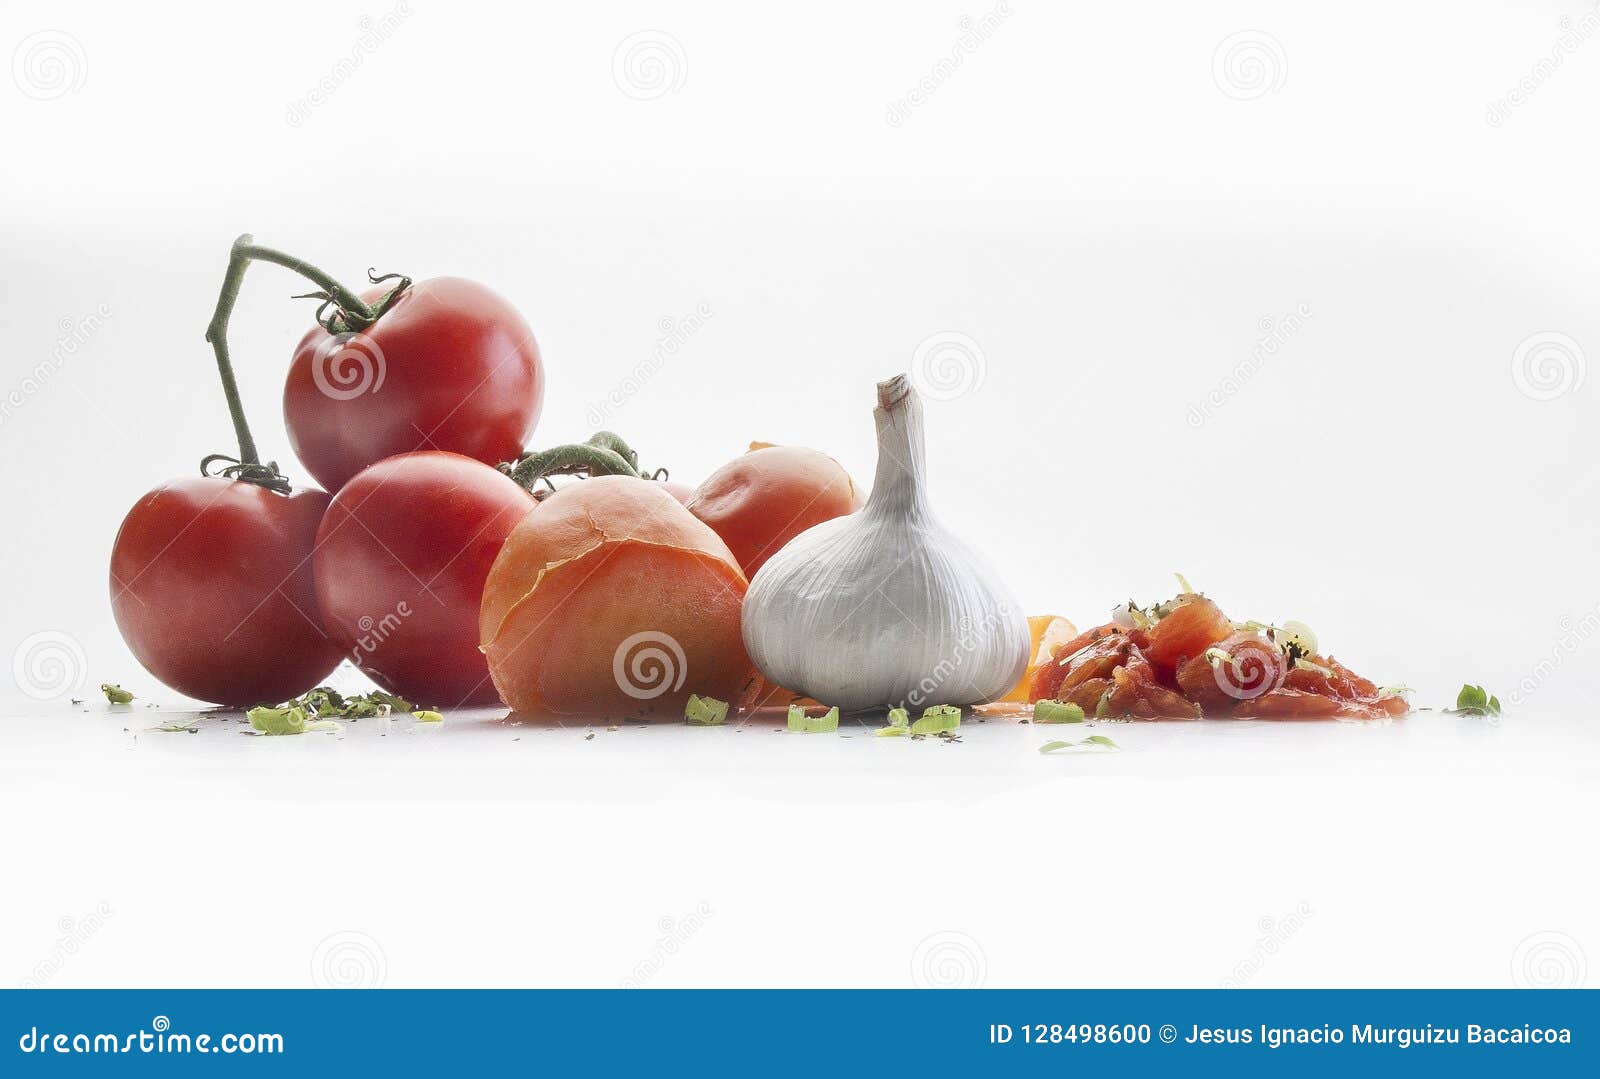 front view of several tomatoes on a branch, a garlic and chive